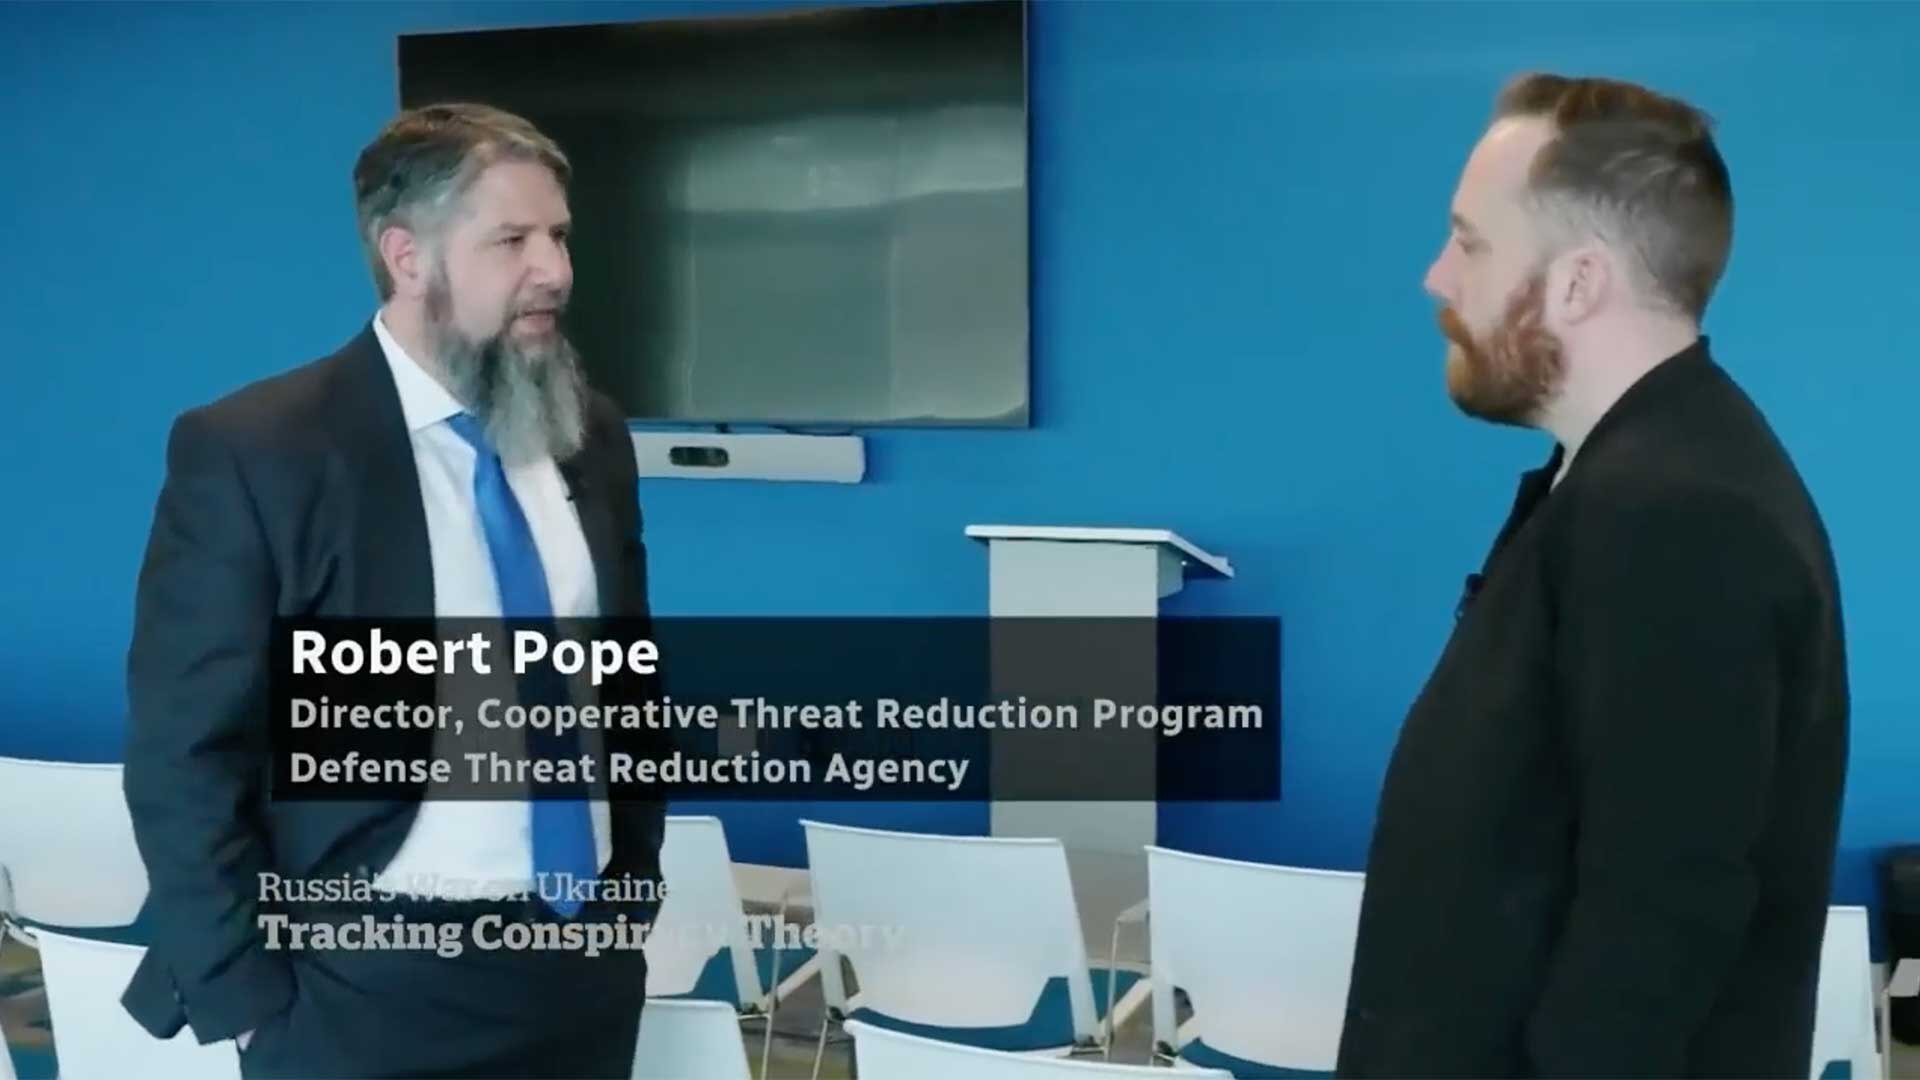 Dr. Robert Pope is interviewed by CBC News in an investigative report that exposes how a QAnon conspiracy theory about U.S.-funded 'Biolabs' in Ukraine morphed into mainstream disinformation.